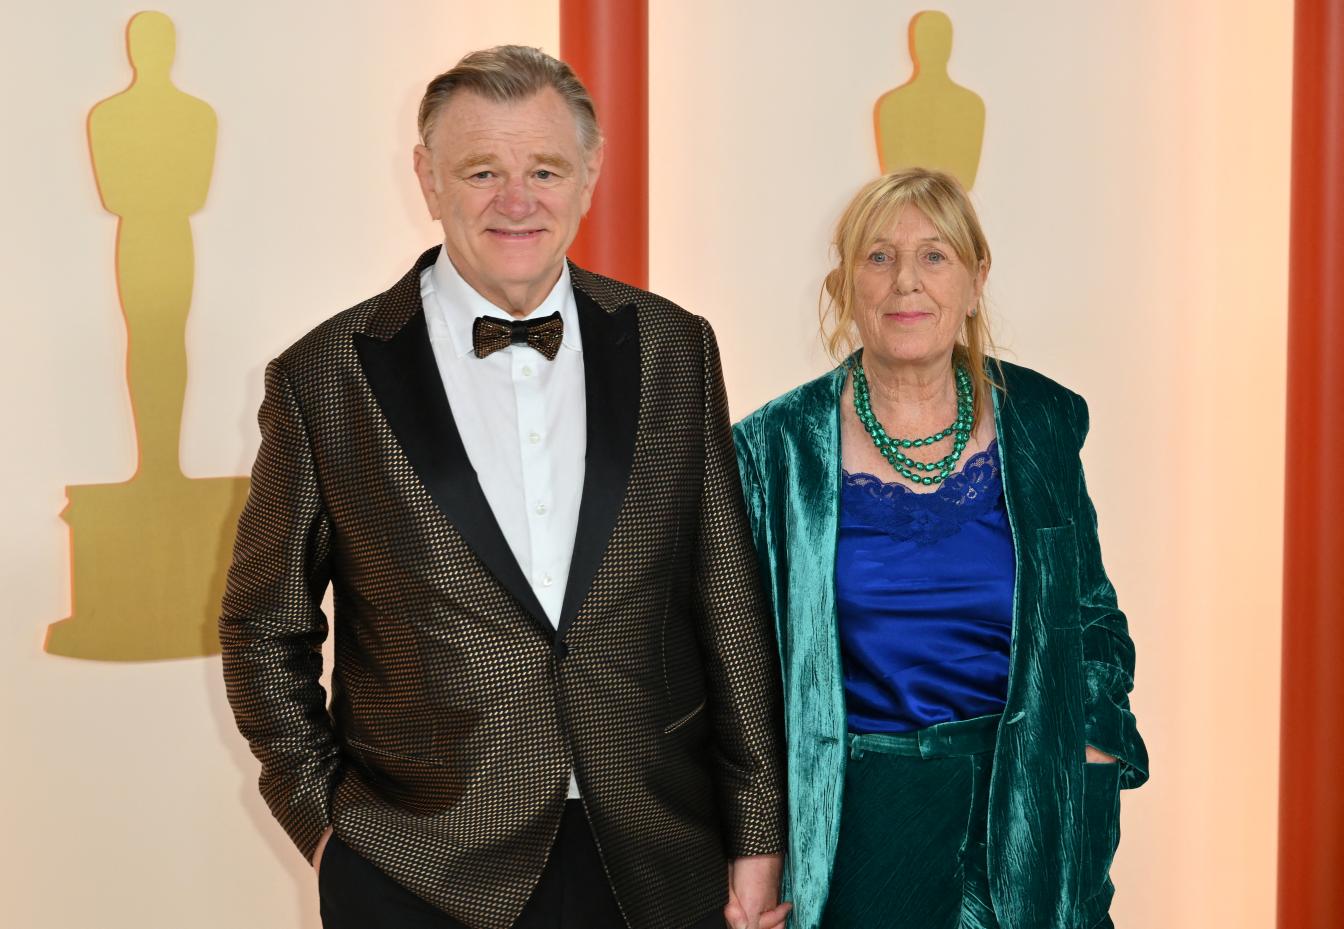 Irish actor Brendan Gleeson and his wife Mary Gleeson attend the 95th Annual Academy Awards at the Dolby Theatre in Hollywood